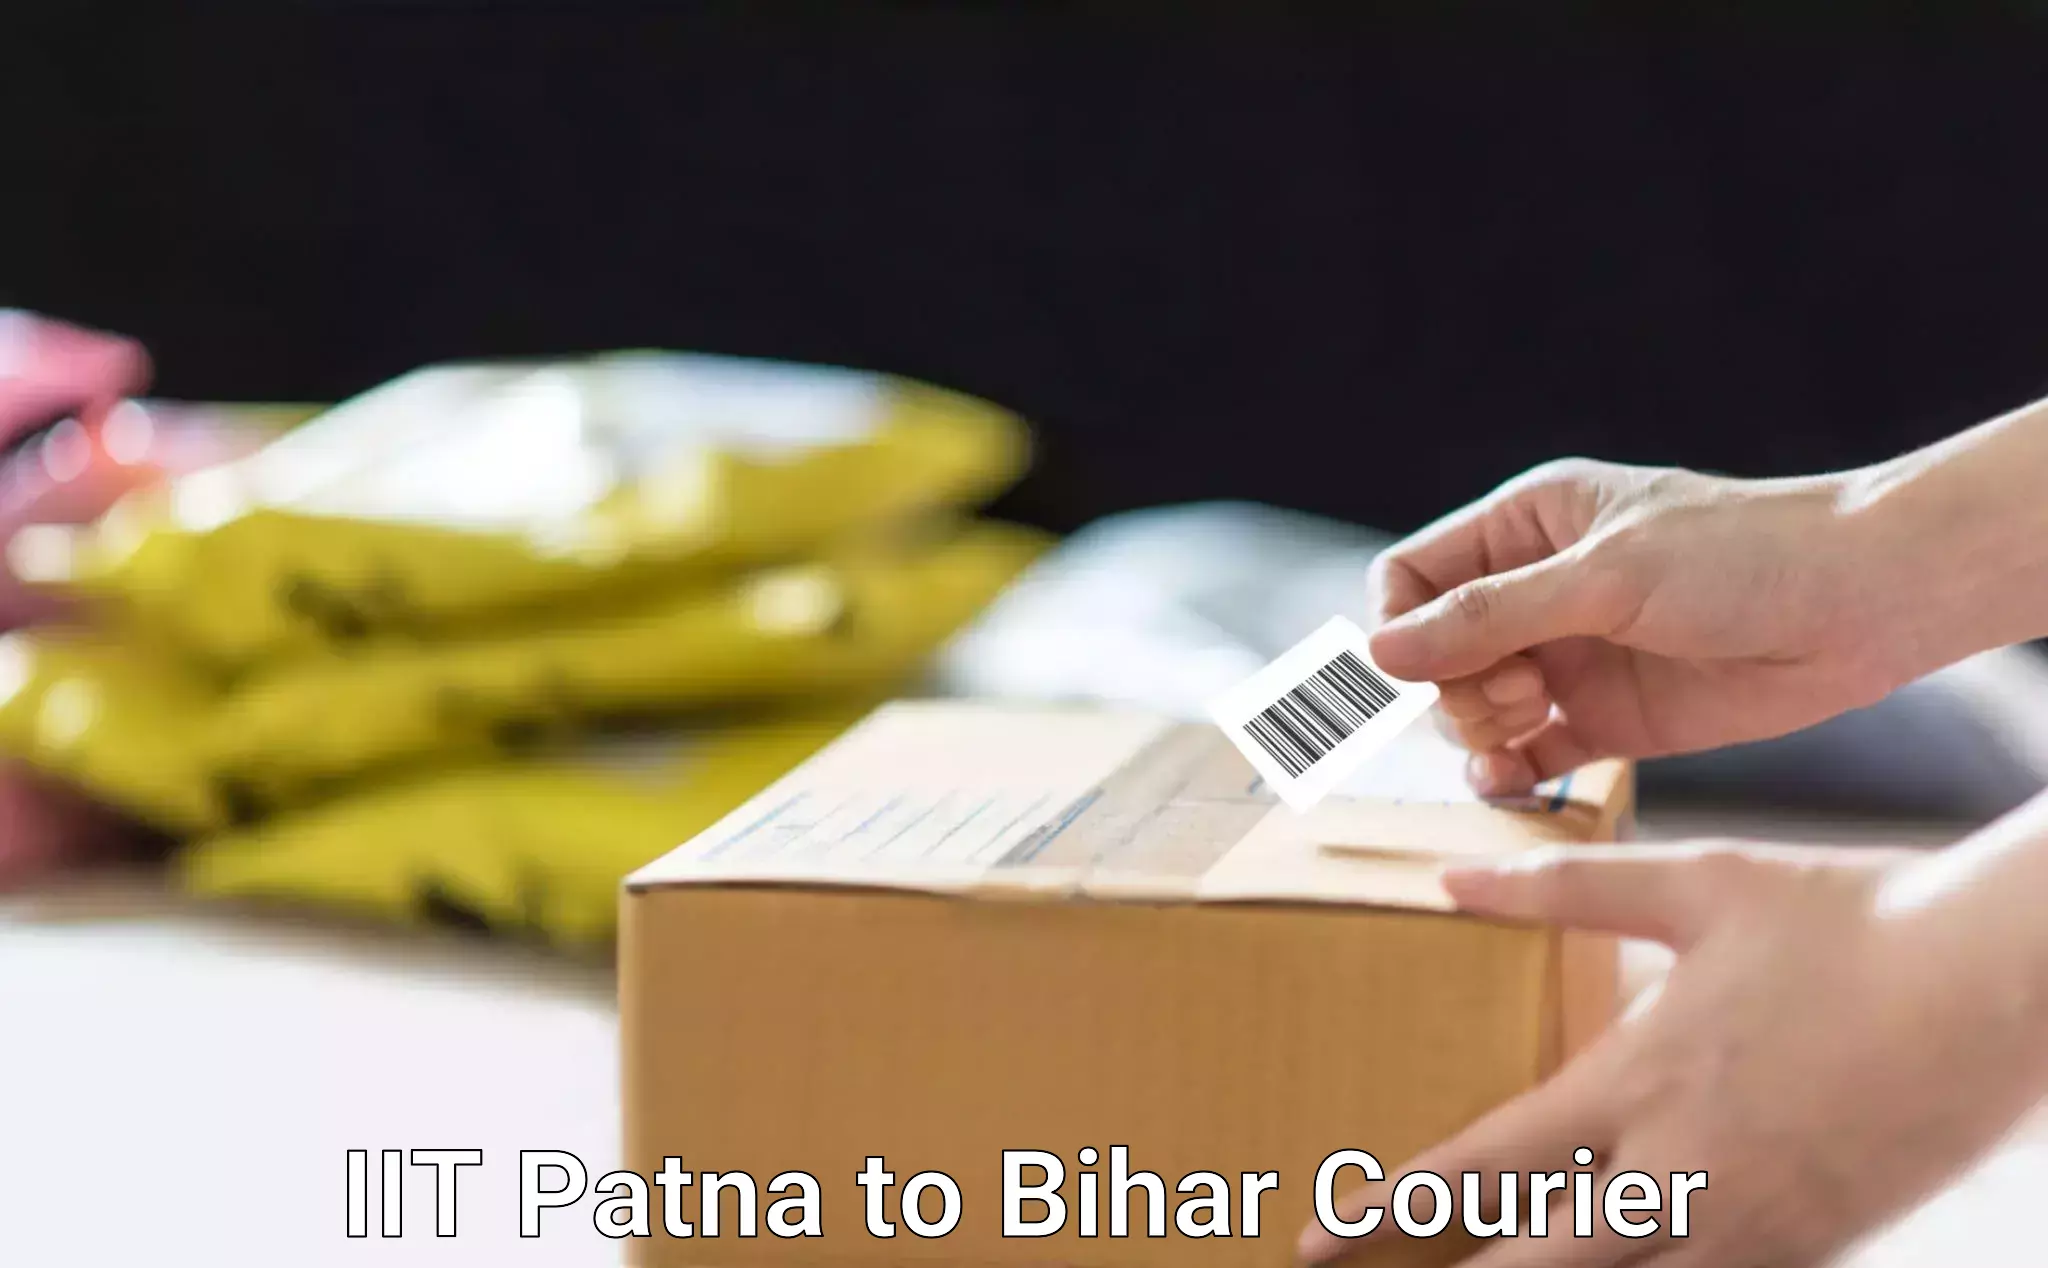 Comprehensive relocation services IIT Patna to Bhojpur